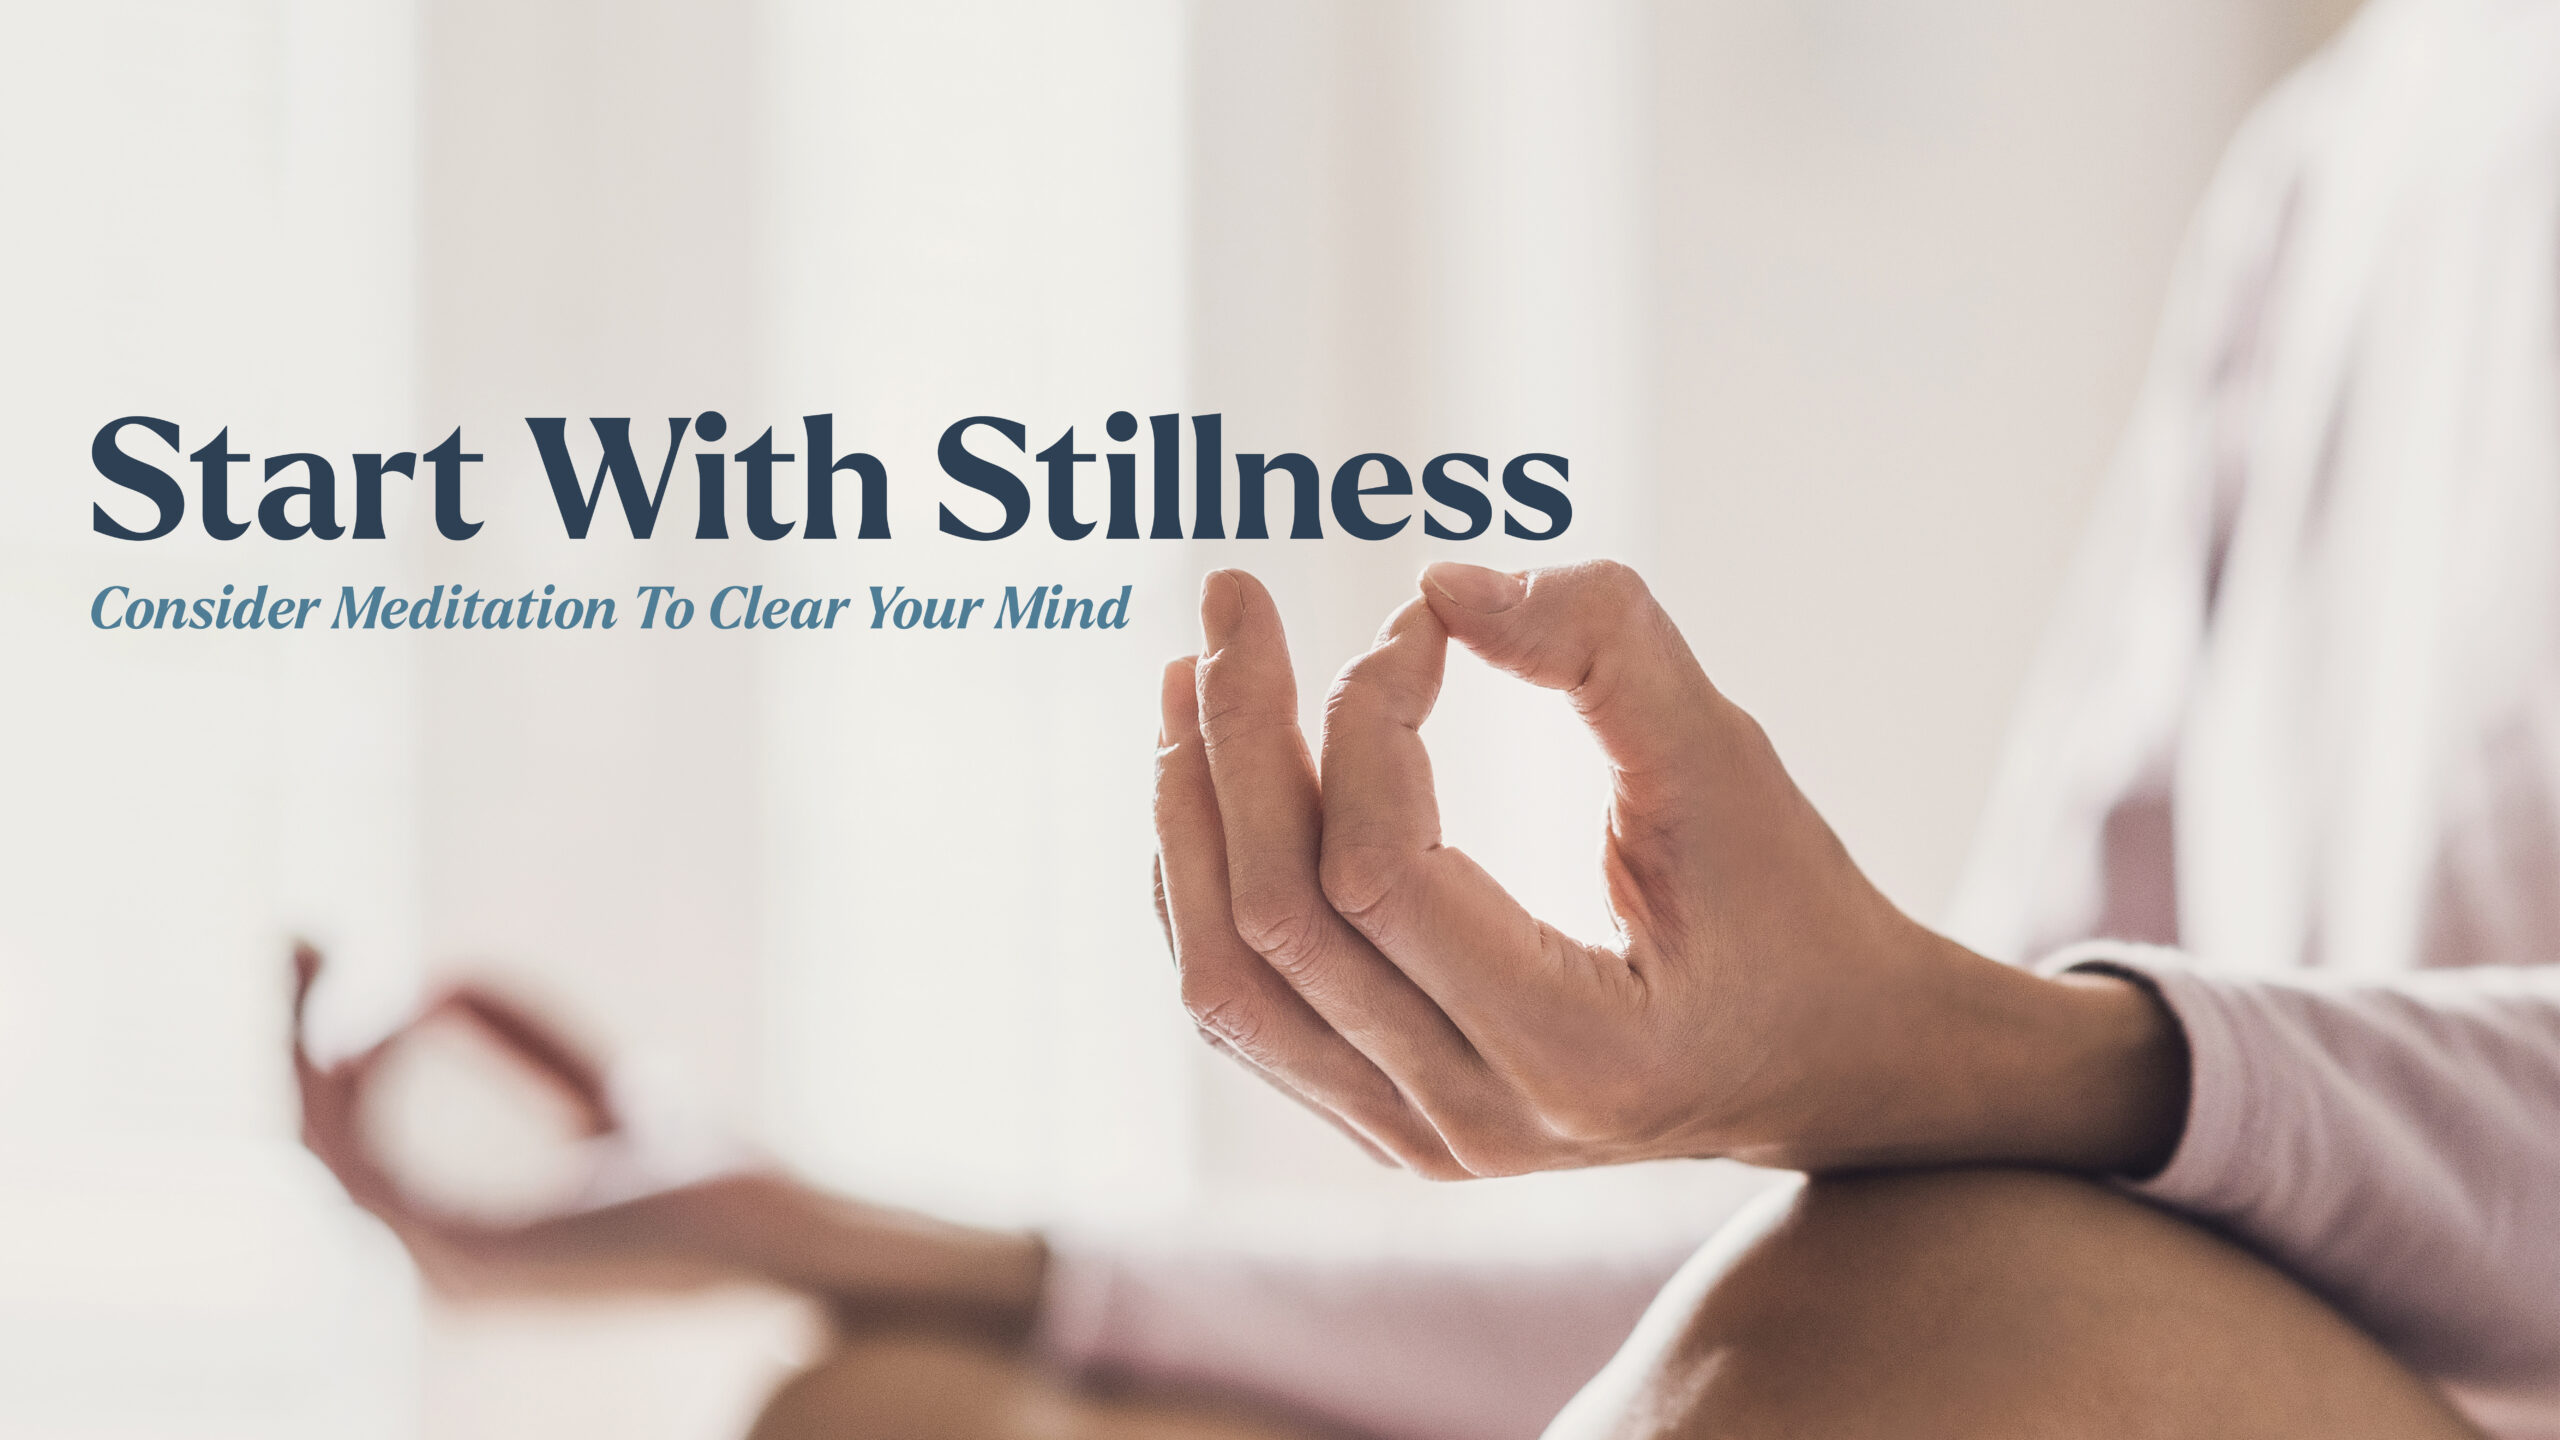 Start with Stillness: Consider Meditation to Clear Your Mind